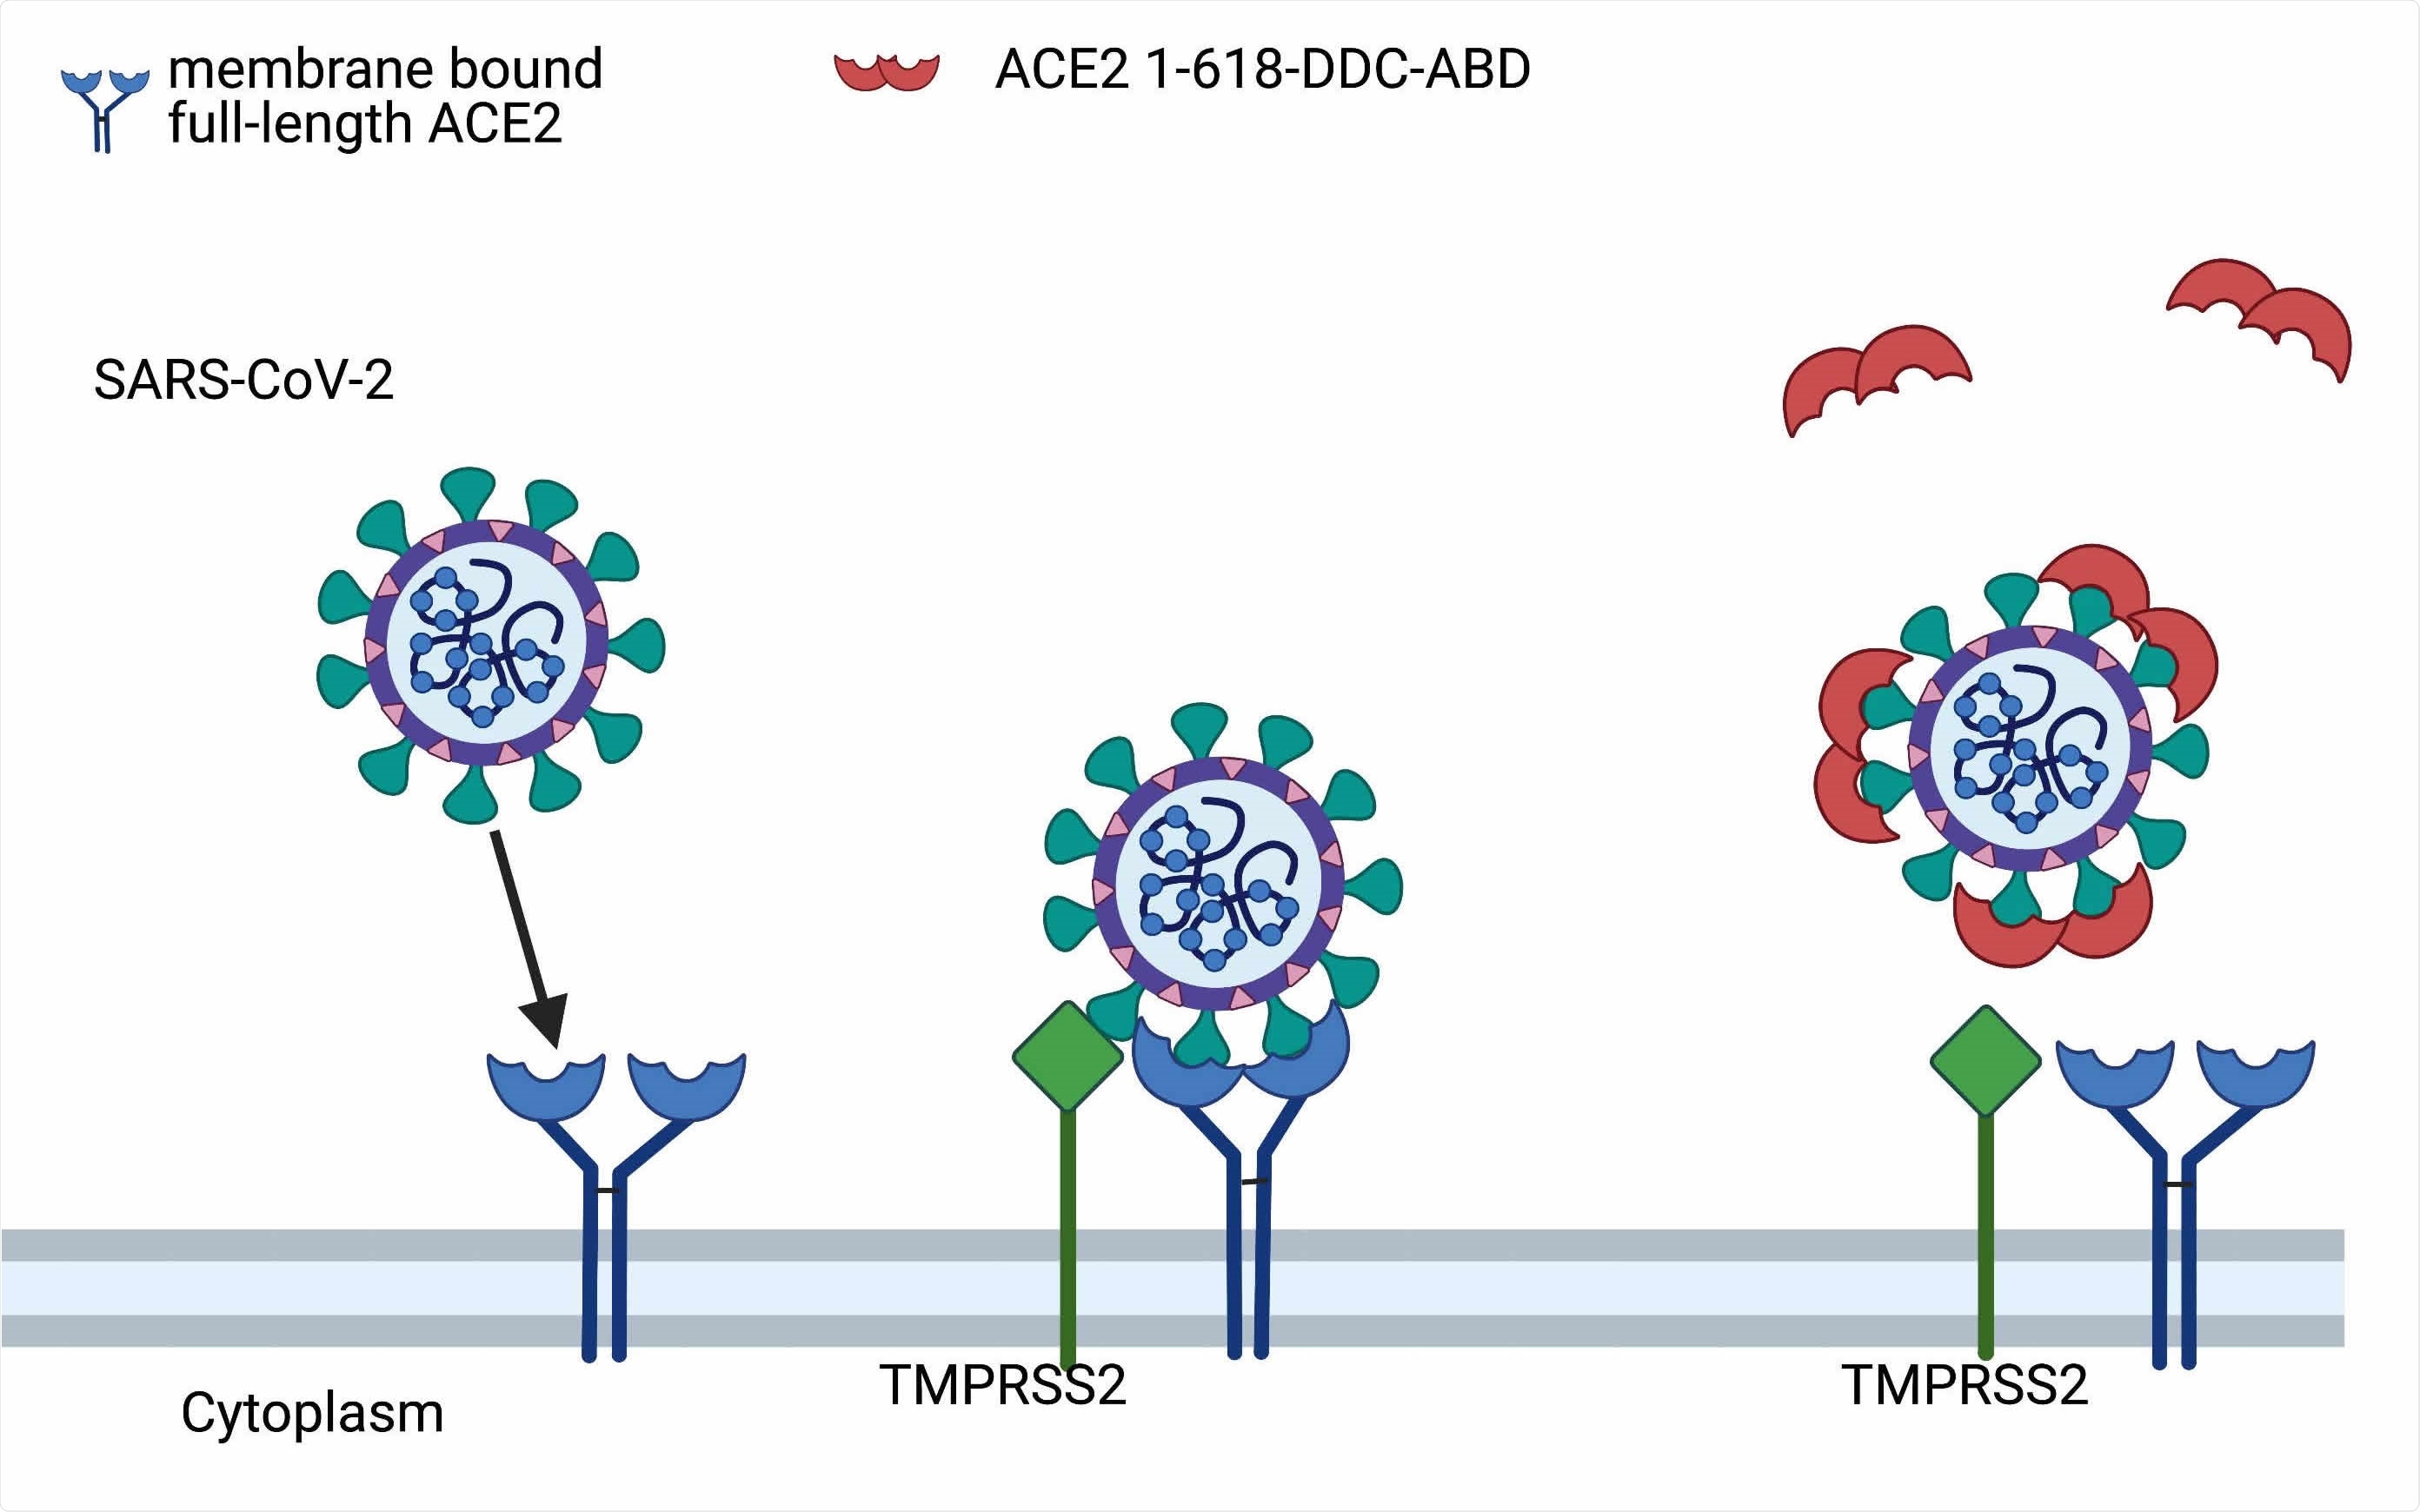 Postulated mechanism of action of ACE2 1-618-DDC-ABD. Administered ACE2 1-618-DDC-ABD (red semi-circles) binds to SARS-CoV-2 acting as a decoy to prevent the binding of SARS-CoV-2 to membrane bound full-length ACE2 receptors (blue). This prevents the internalization of the ACE2-SARS-CoV-2 complex activated by TMPRSS2 (green). Modified from Davidson et al, Hypertension 2020 (10). Created with biorender.com.